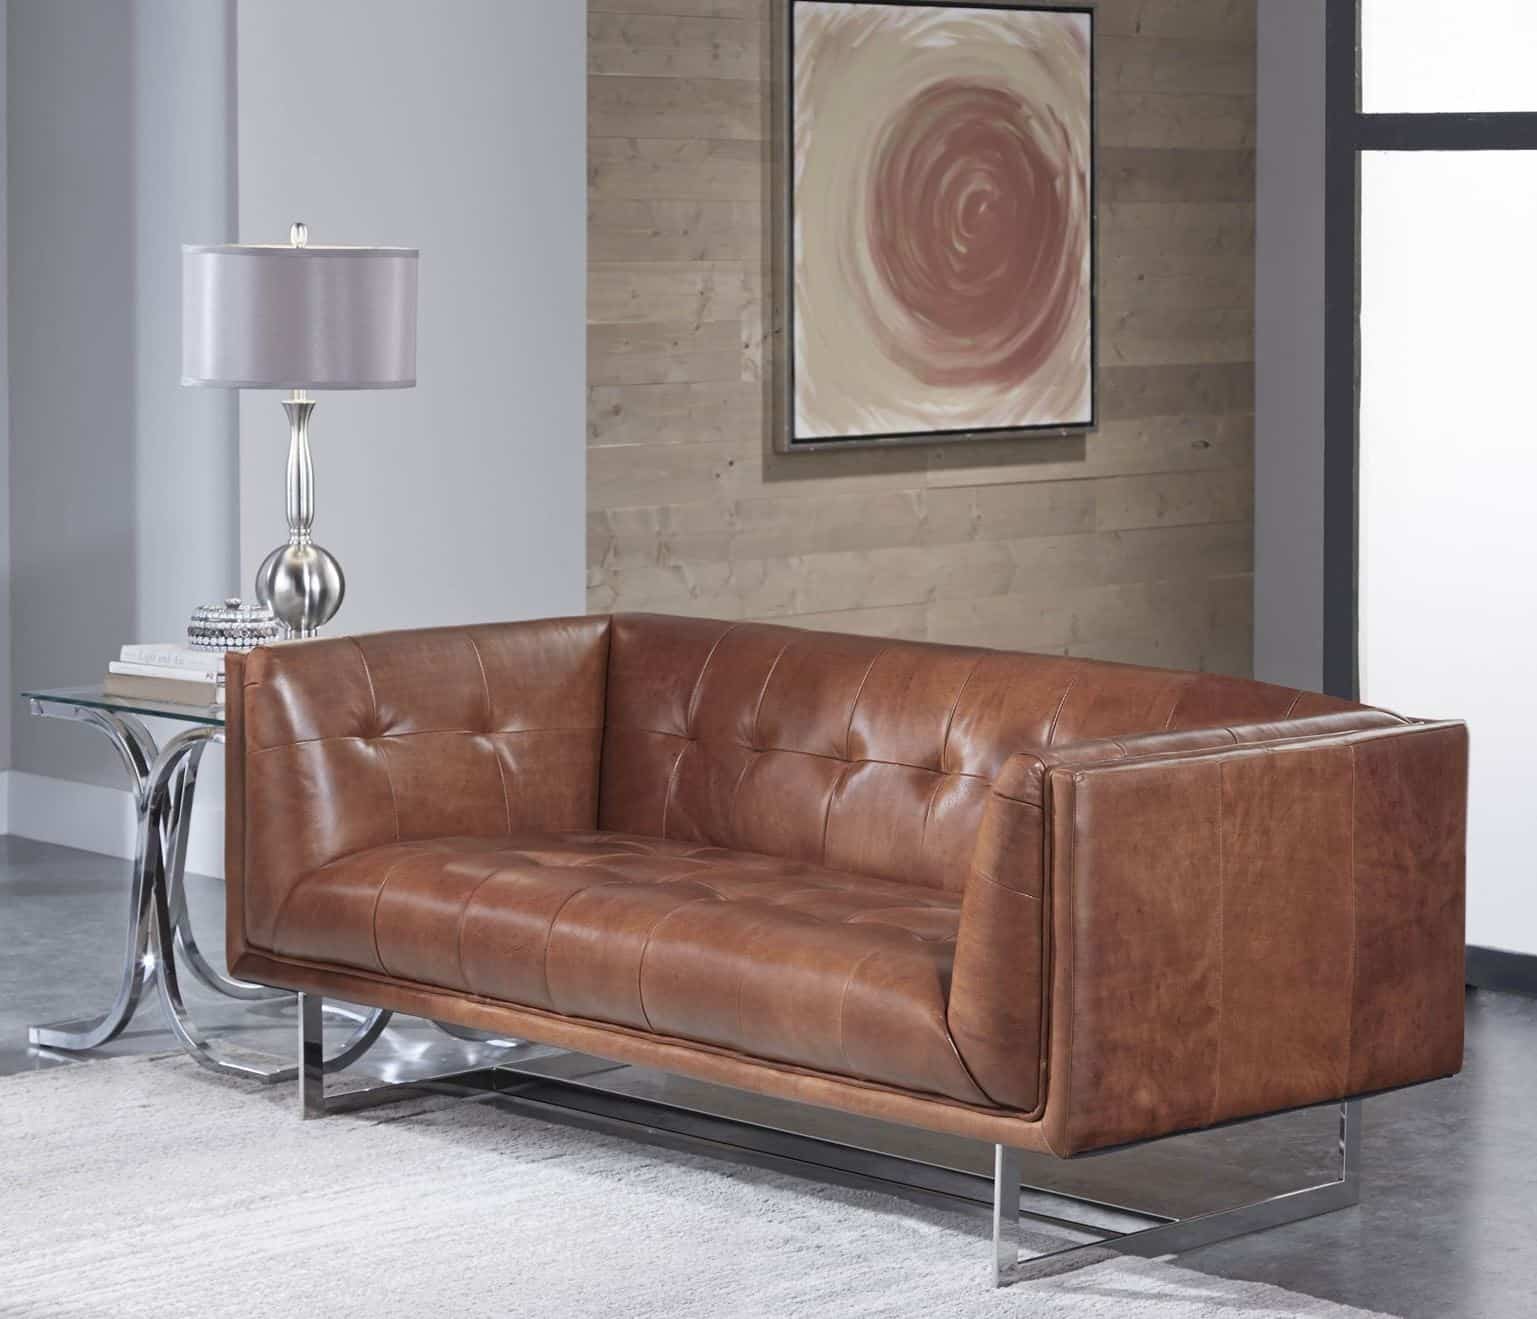 Teague Cognac Leather Living Room Set from Lazzaro (WH